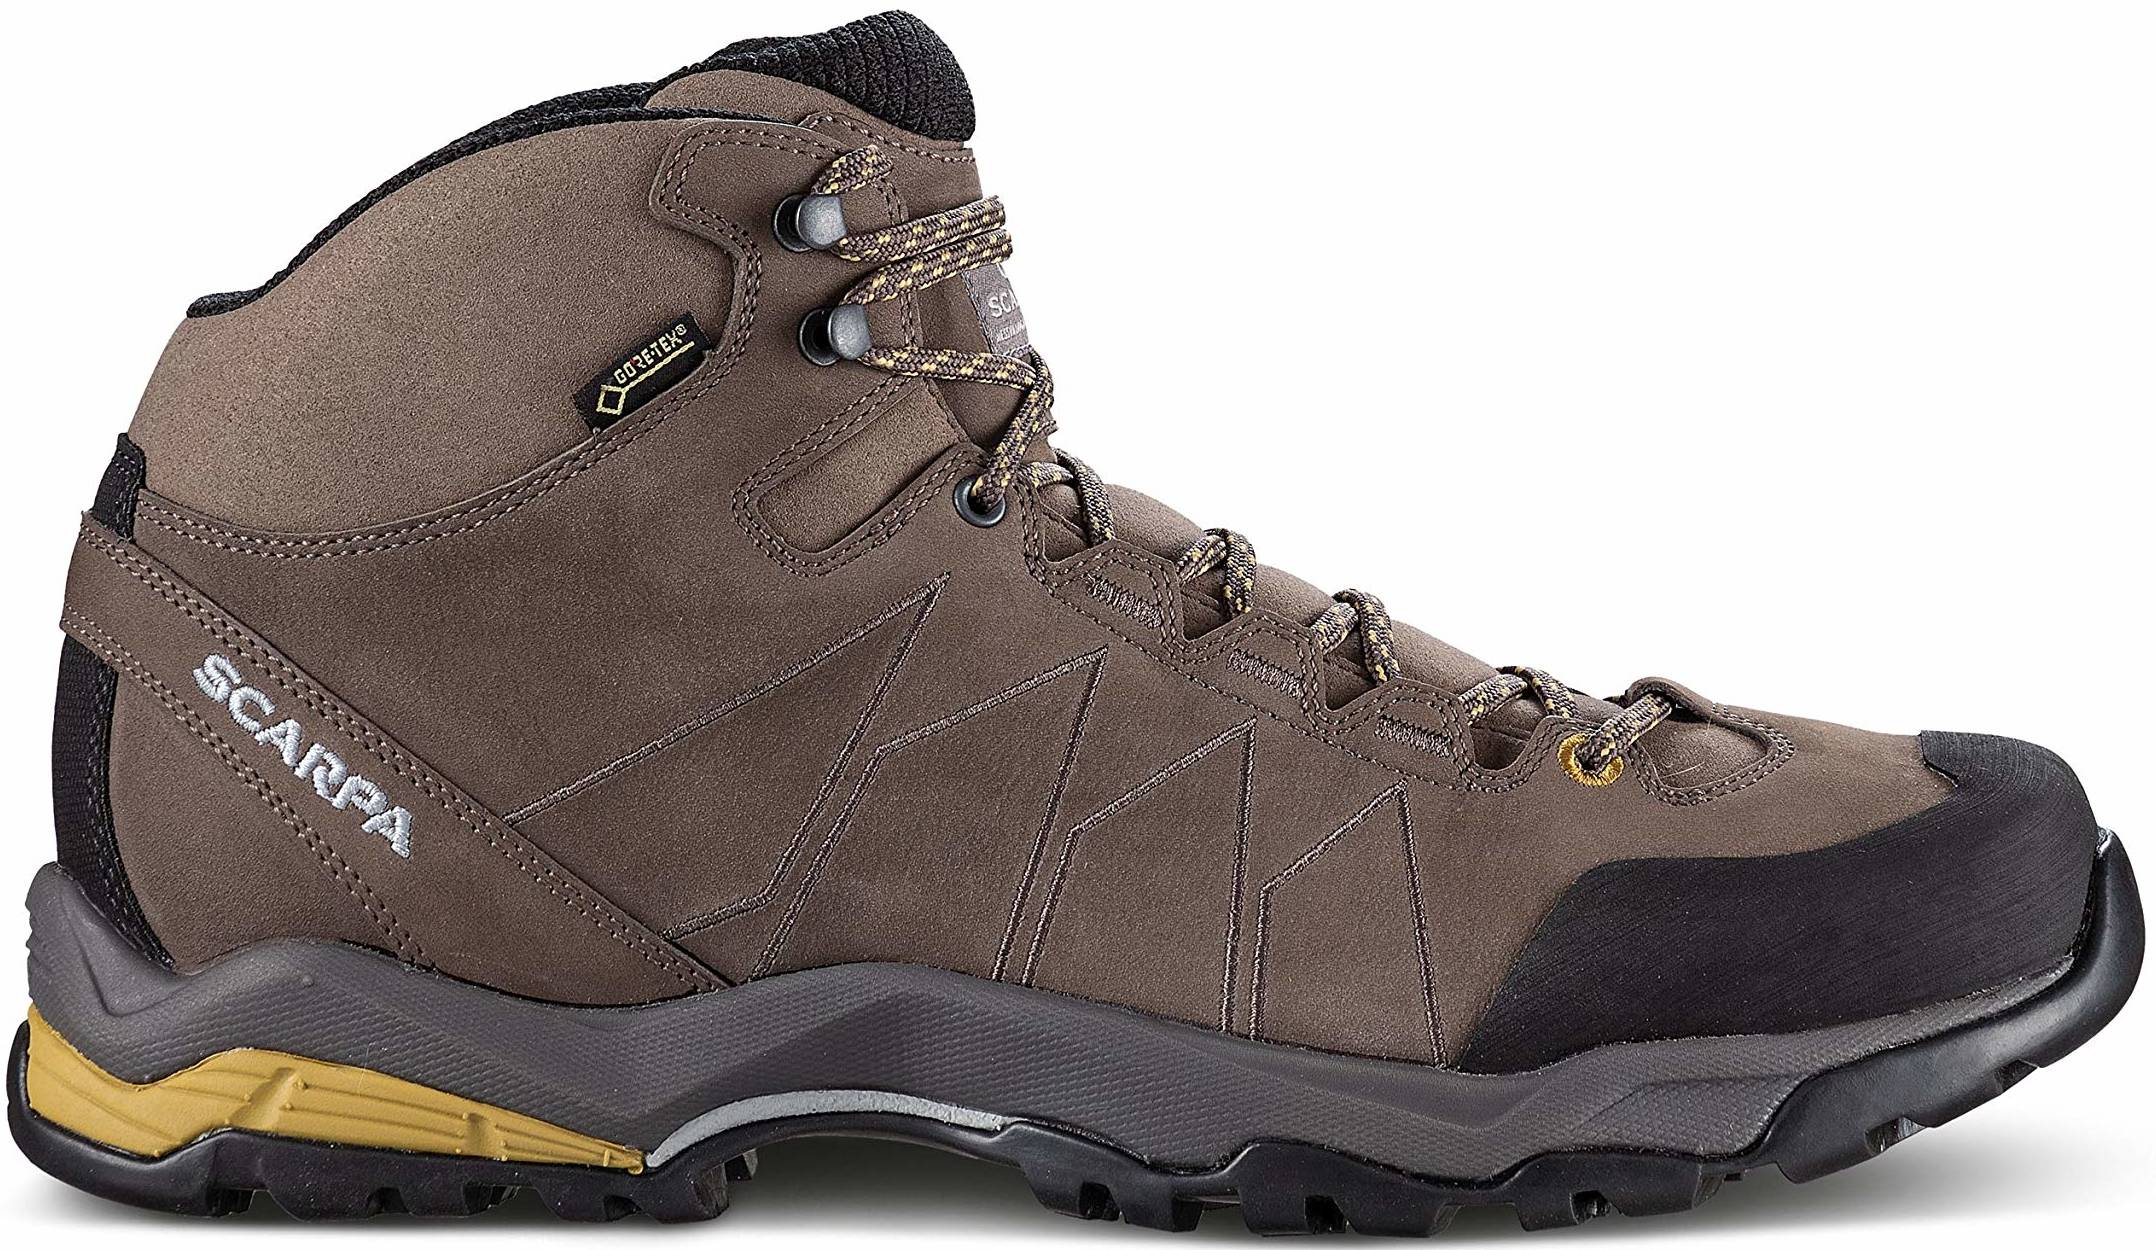 Scarpa Men's Moraine Mid GTX Lightweight Waterproof Gore-Tex Boots for Backpacking and Hiking 